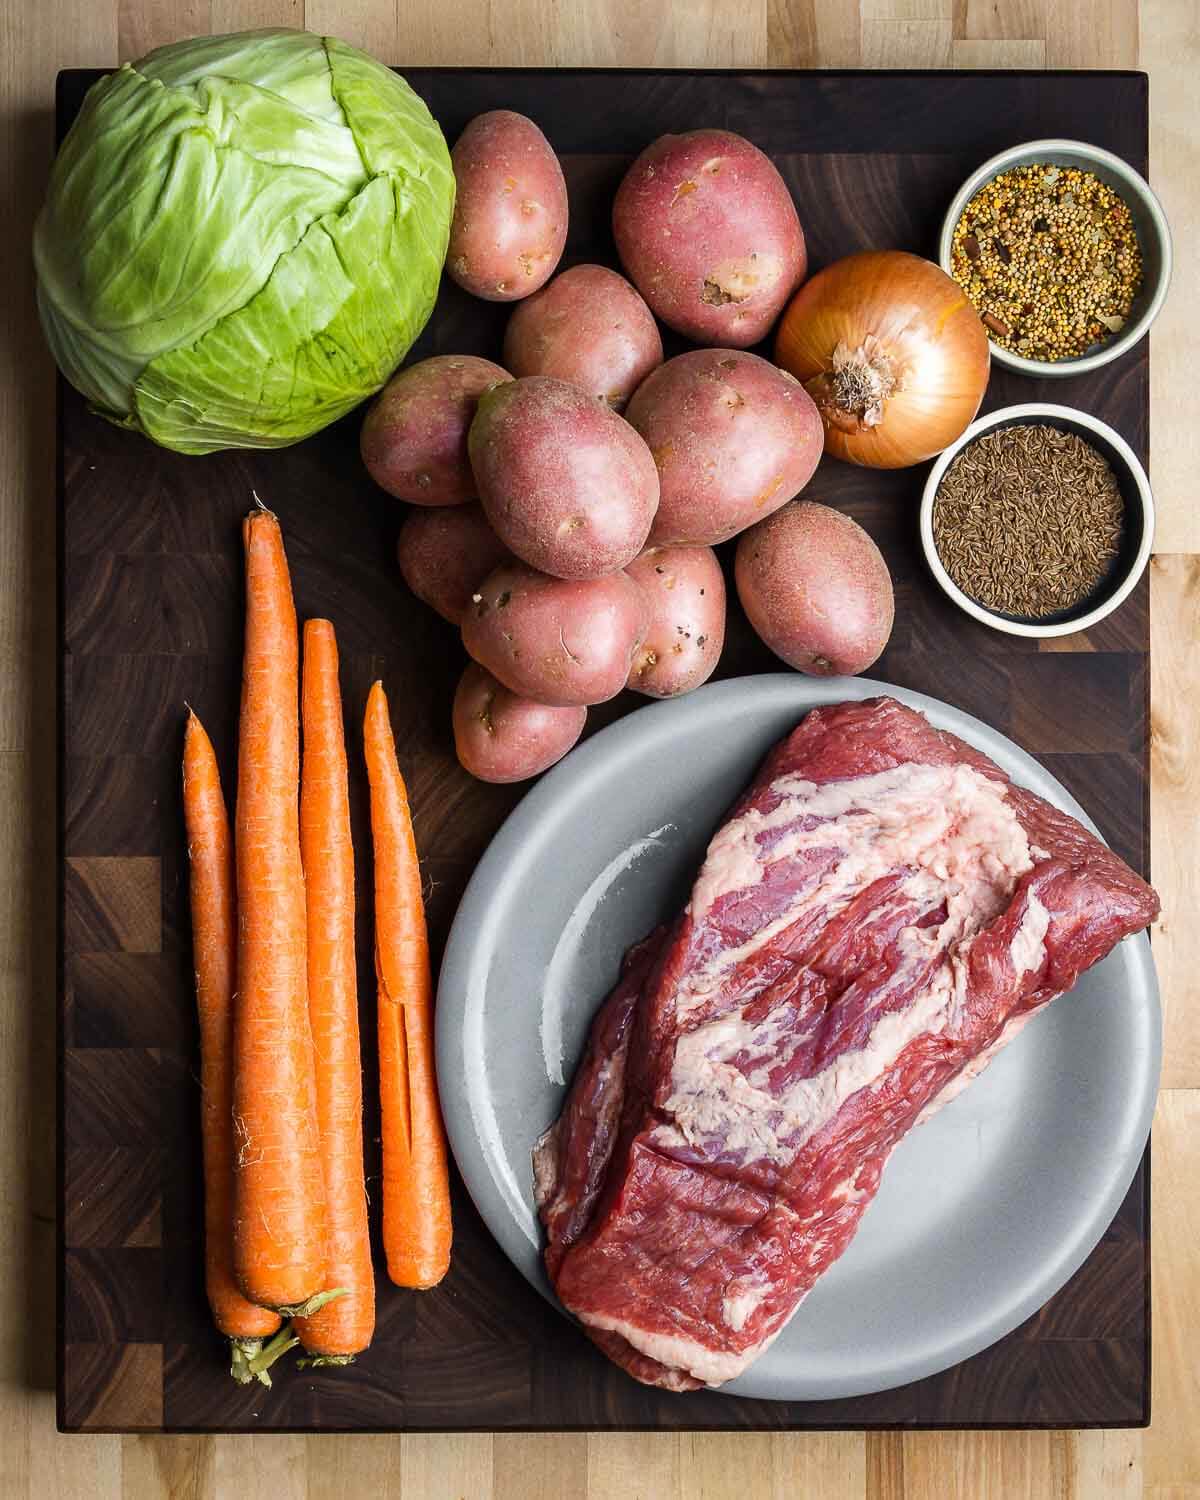 Ingredients shown: cabbage, potatoes, onion, pickling spice, caraway seeds, carrots, and corned beef.